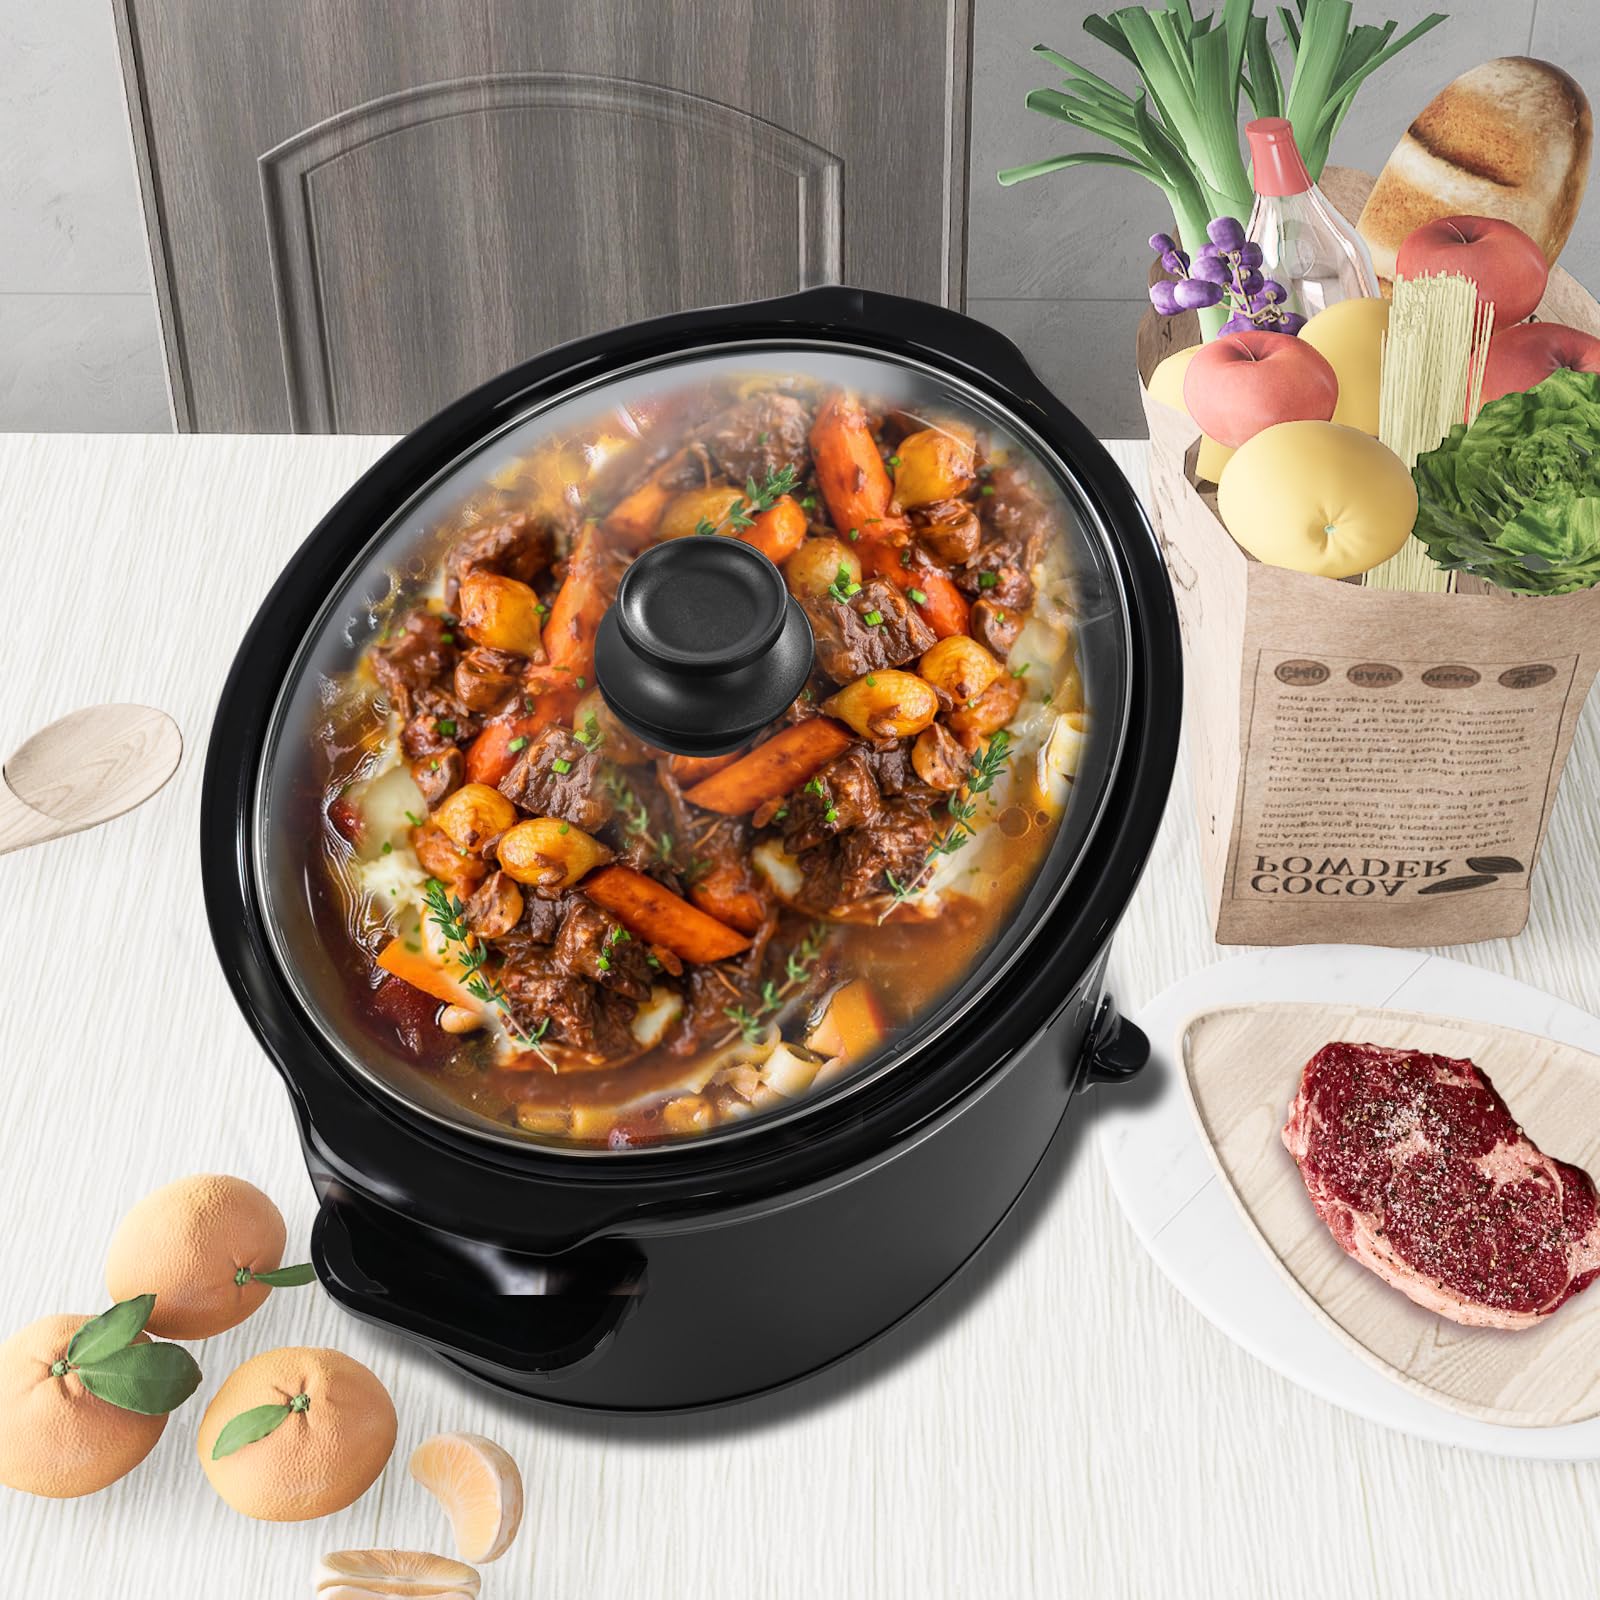 Magnifique 7 Quart Slow Cooker Oval Manual Pot Food Warmer with 3 Cooking Settings, Black Stainless Steel